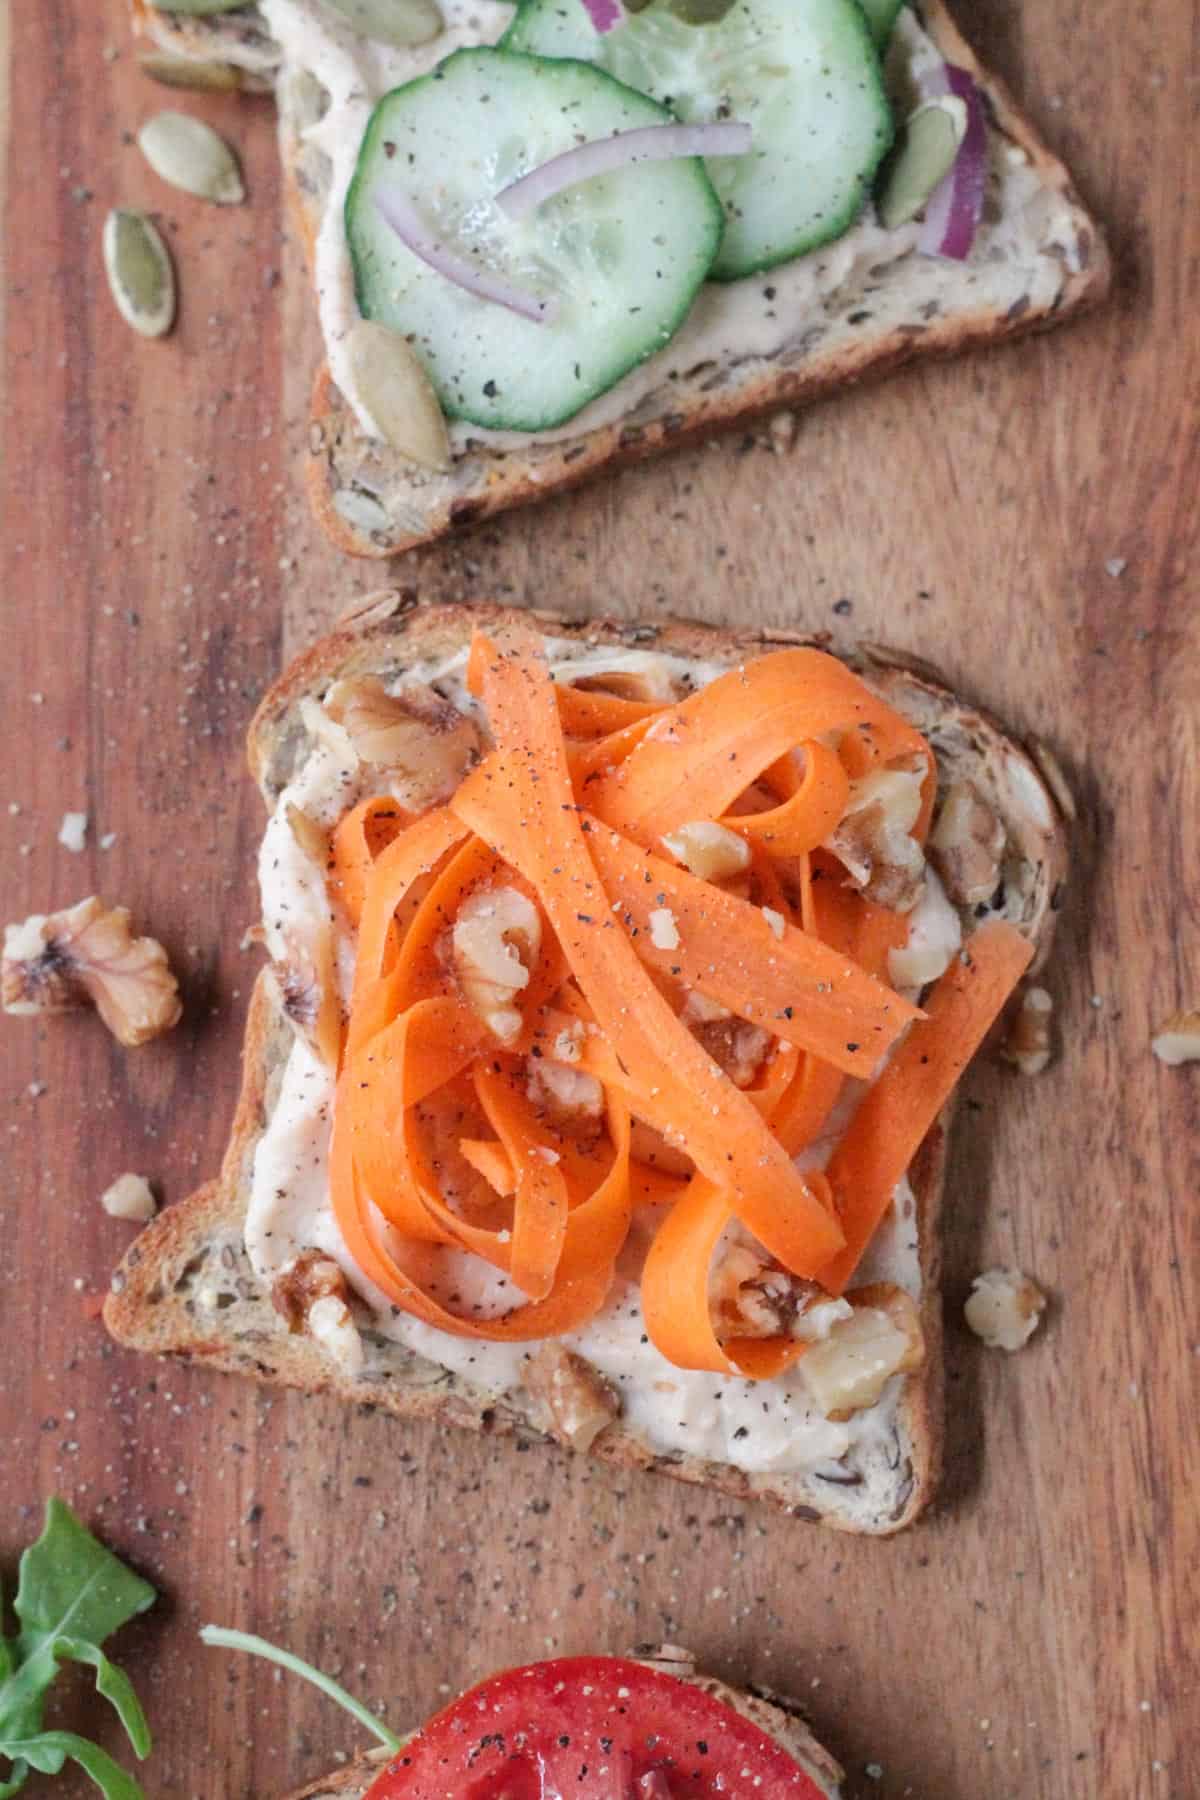 Hummus toast topped with carrot ribbons and chopped walnuts.